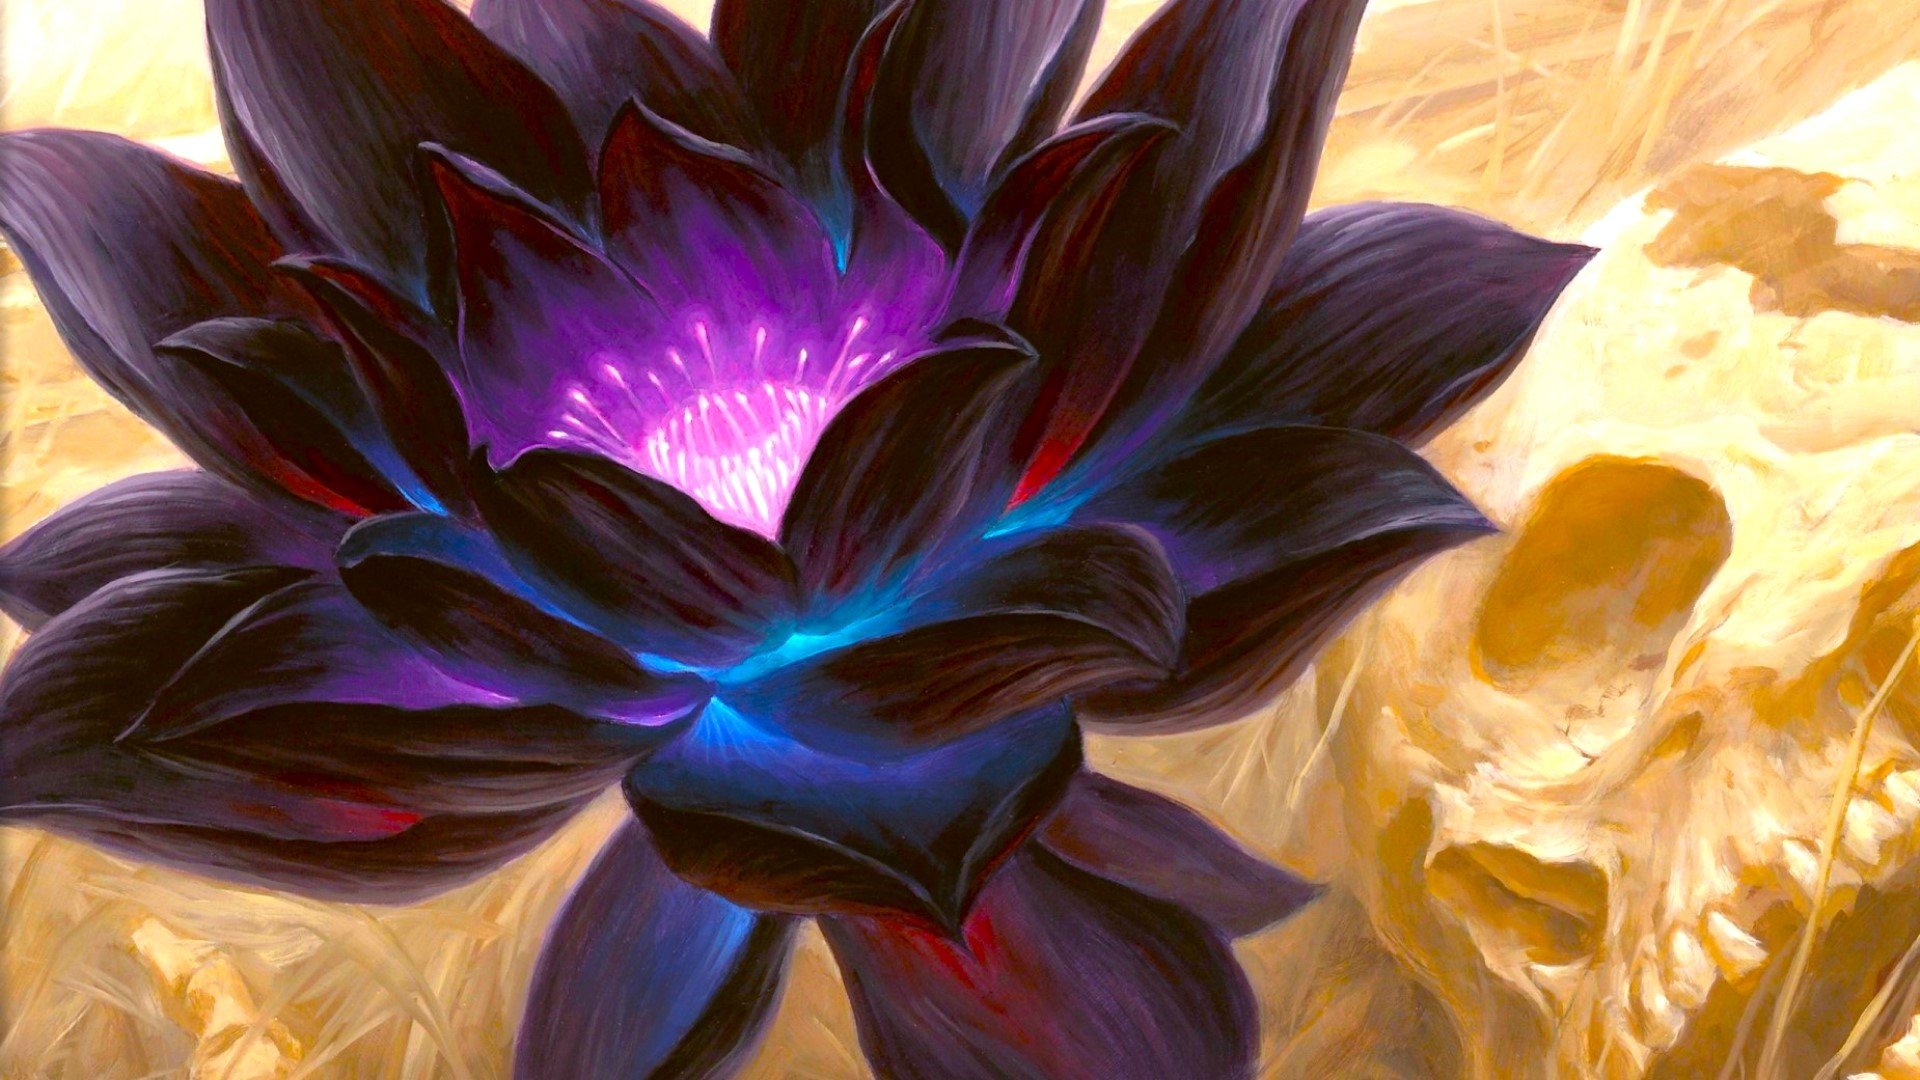 MTG Power 9 - artwork from the MTG card Black Lotus, showing a glowing purple flower.